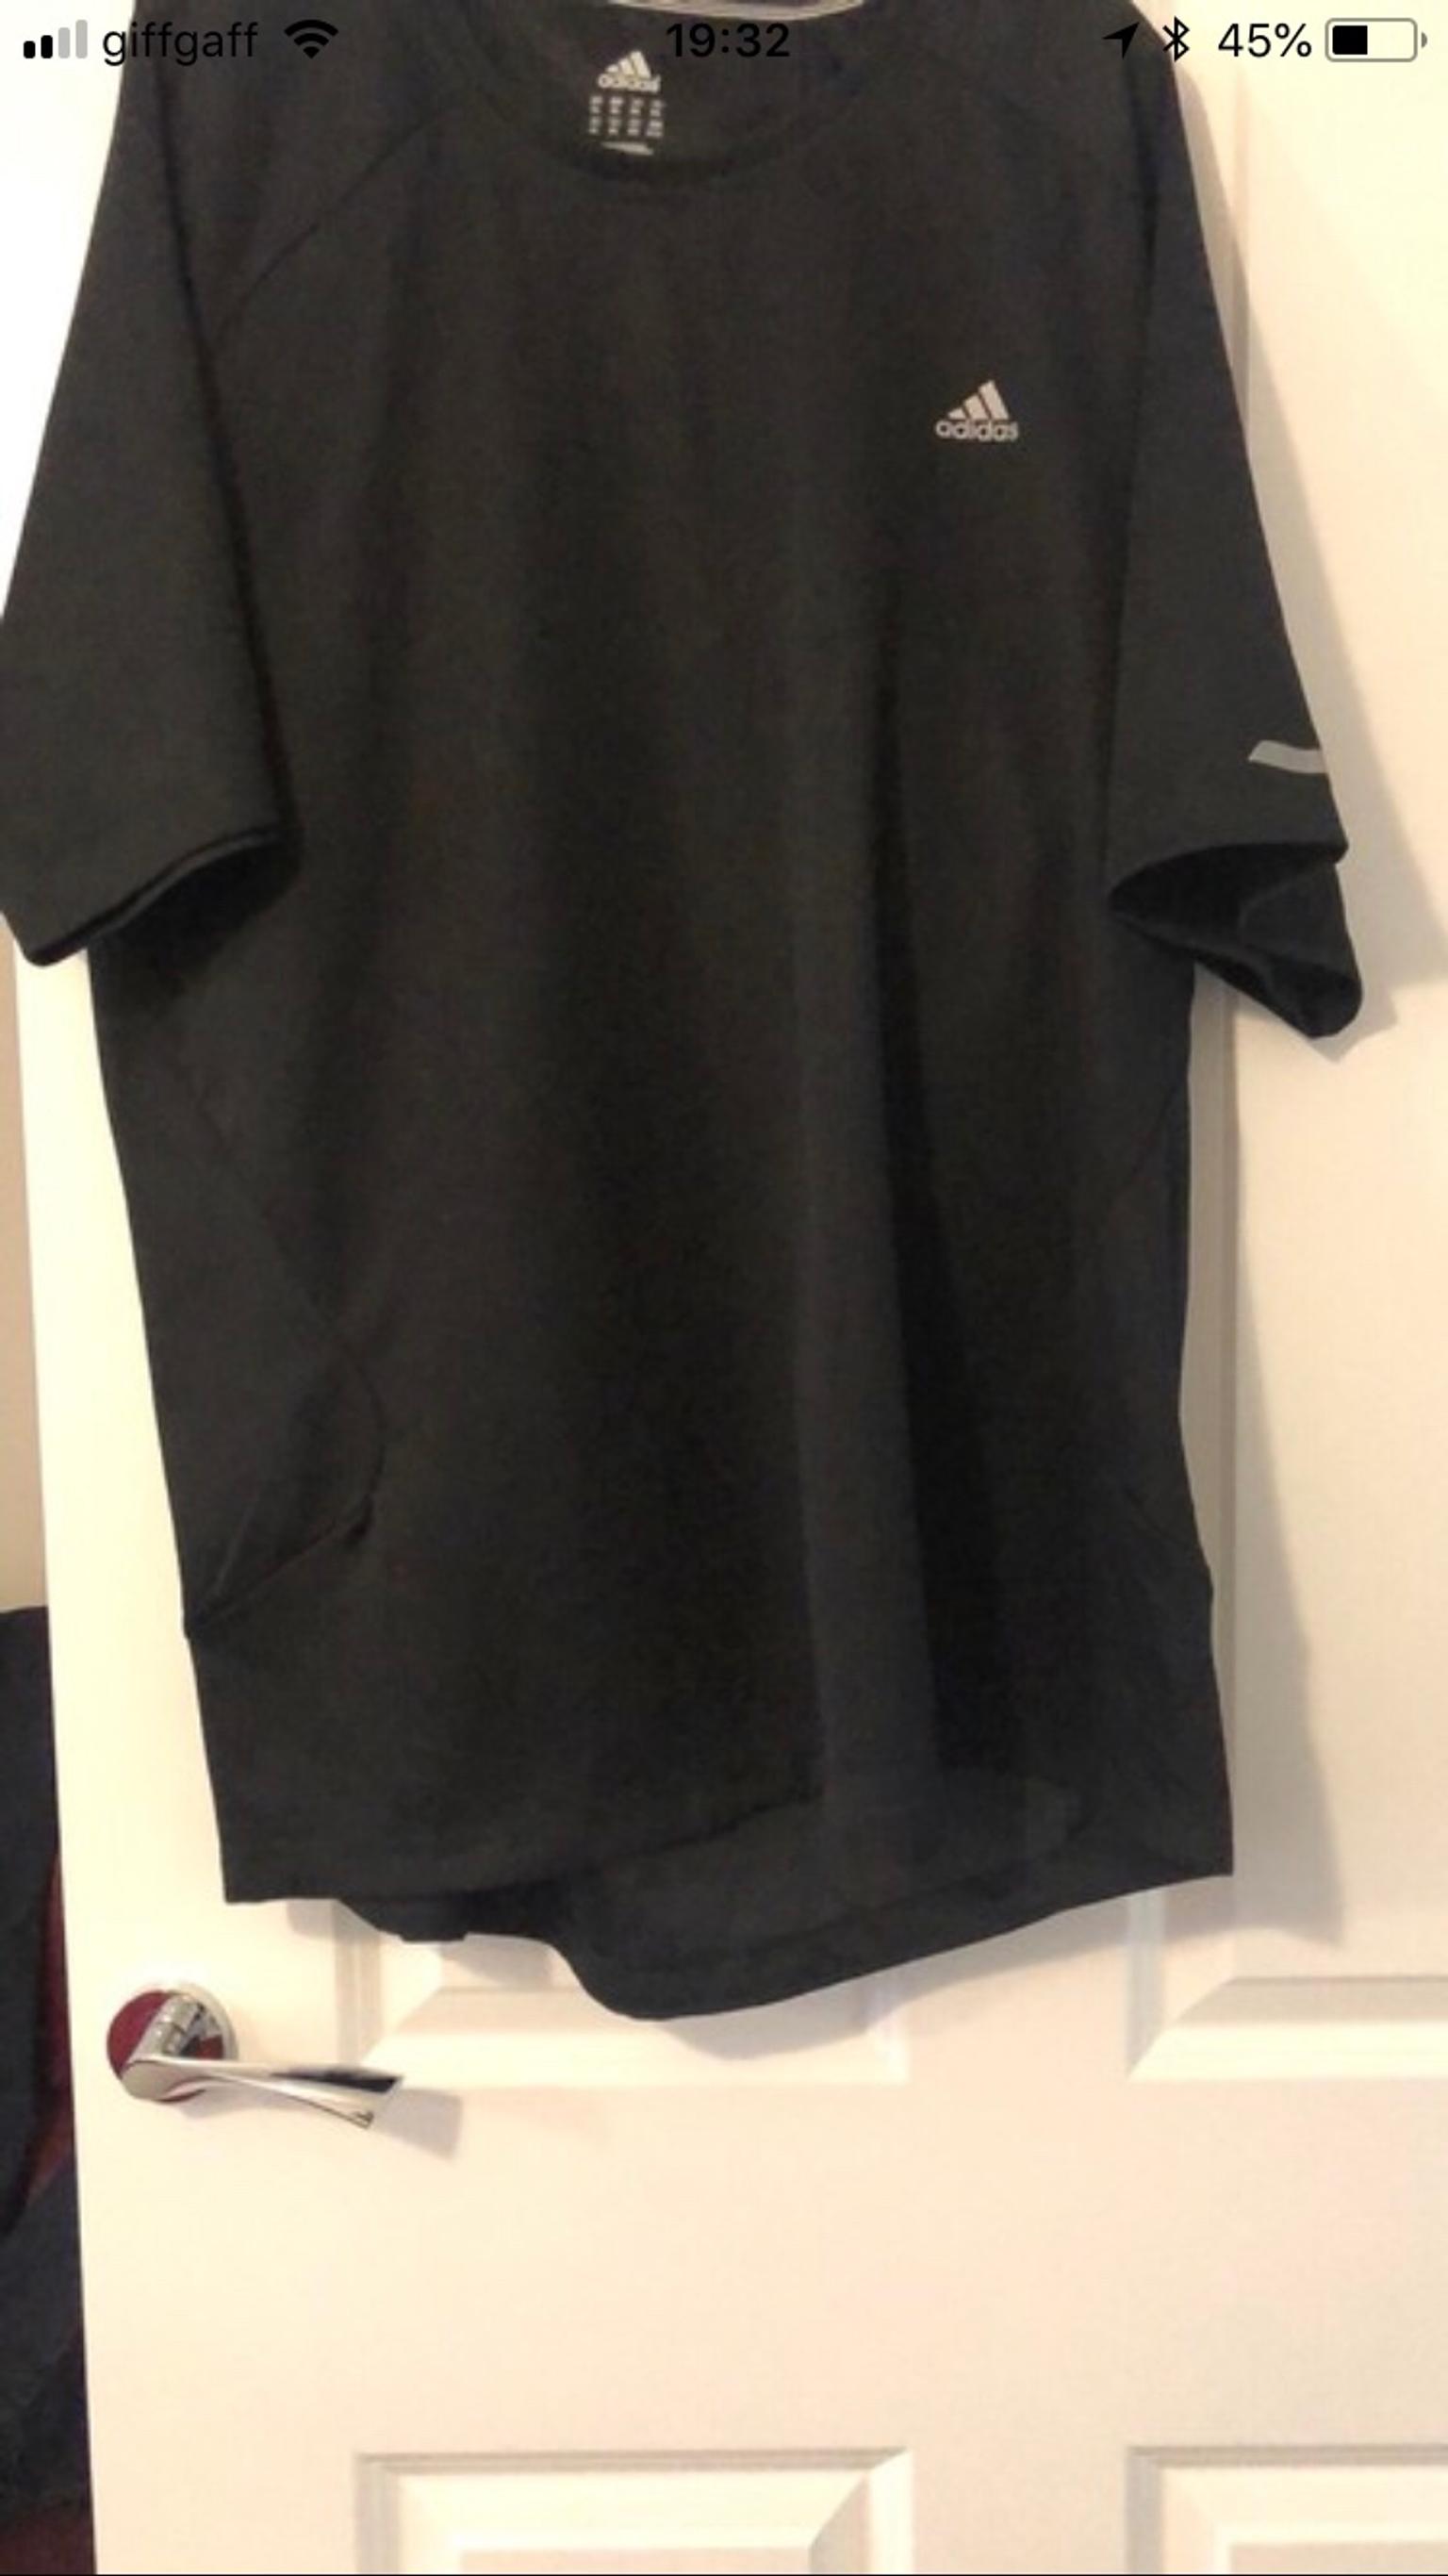 Men's Adidas Climacool T-Shirt in DY4 Sandwell for £7.00 for sale | Shpock